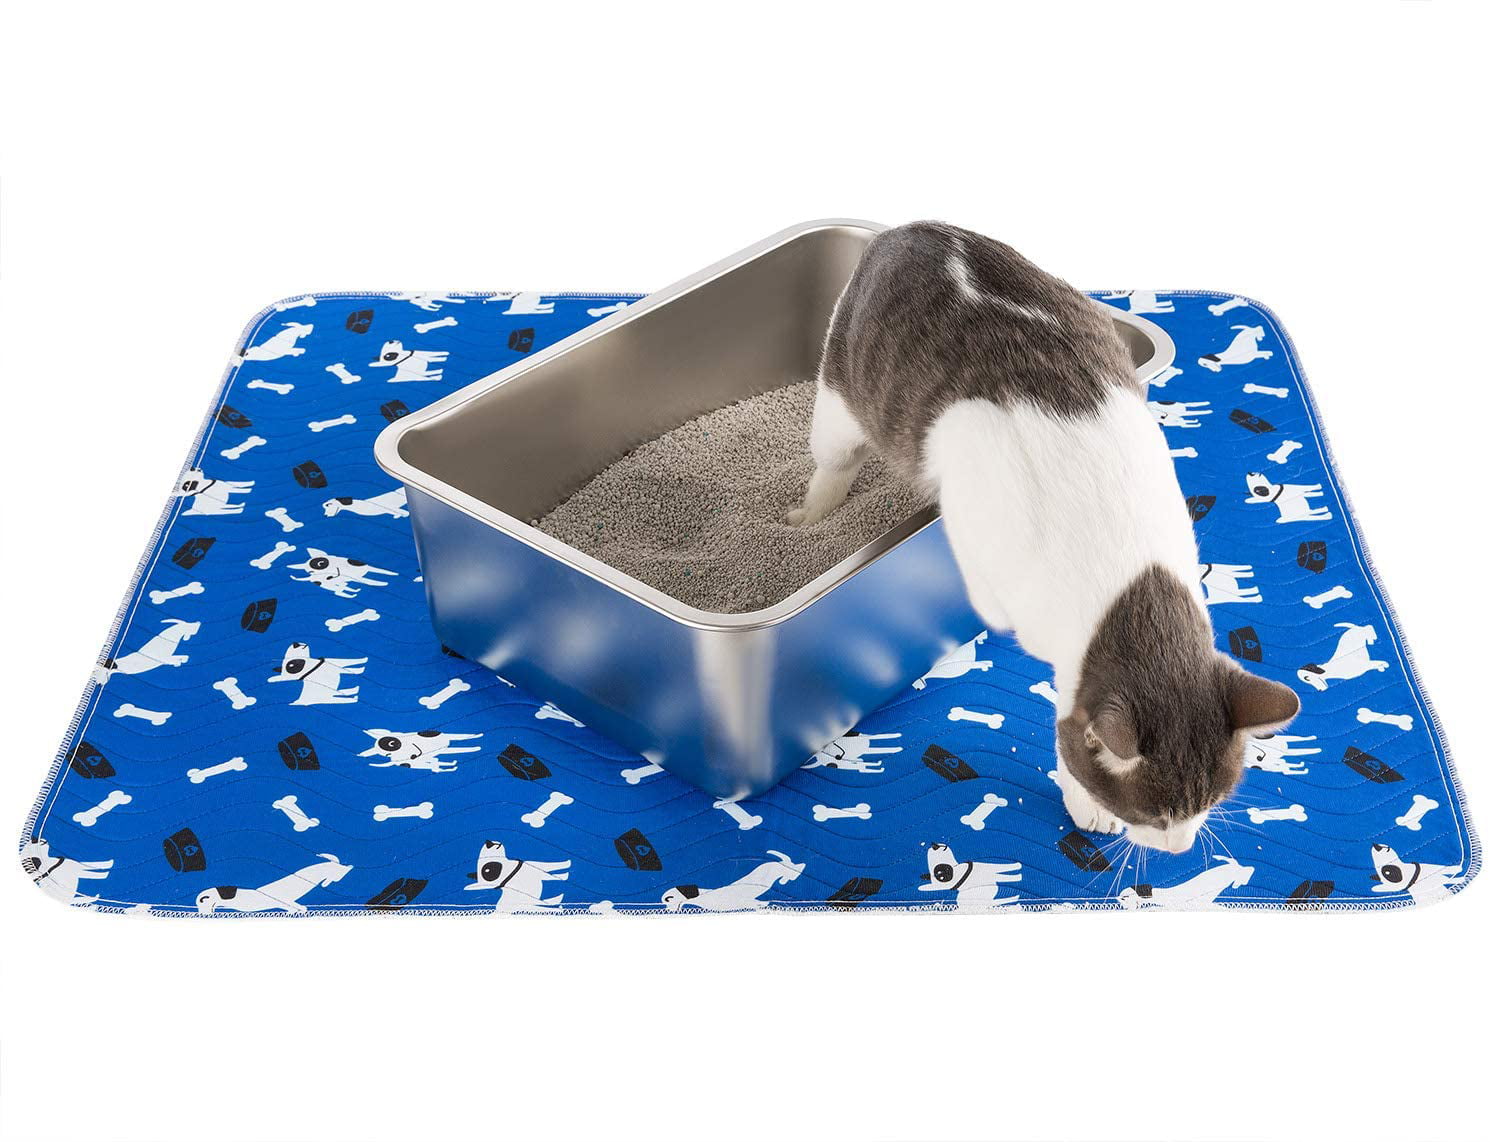 Yangbaga Stainless Steel Litter Box for Cat and Rabbit Never Bend Non Stick Smooth Surface Easy to Clean Large Size with High Sides and Non Slip Rubber Feets Rust Proof Odor Control 